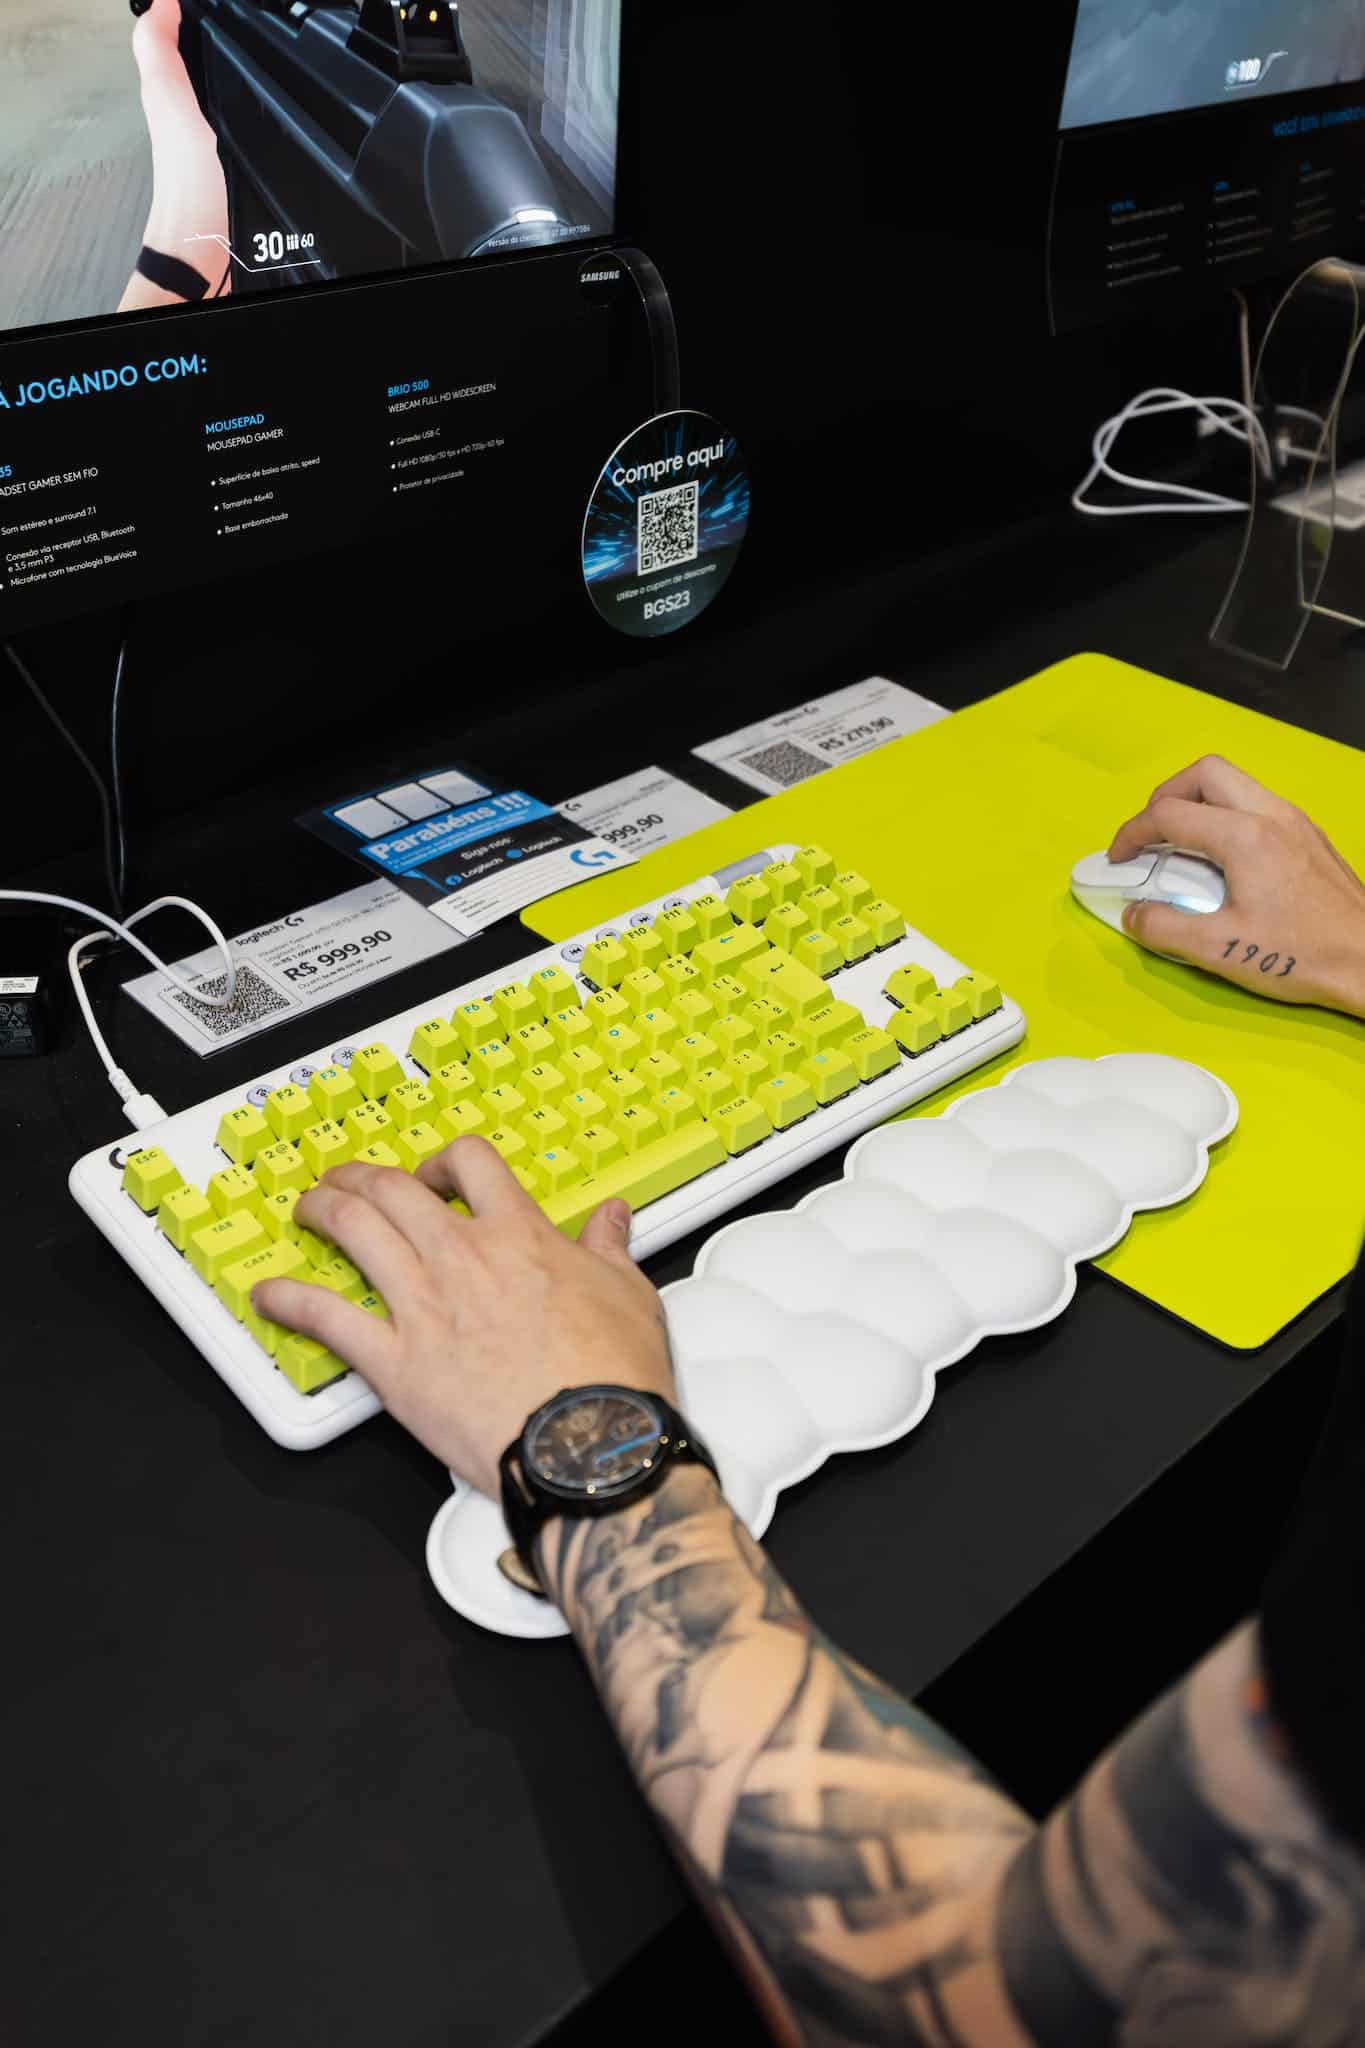 Wrist Rest for a Keyboard - Gaming on a White Logitech G Pro Keyboard with Yellow Keys